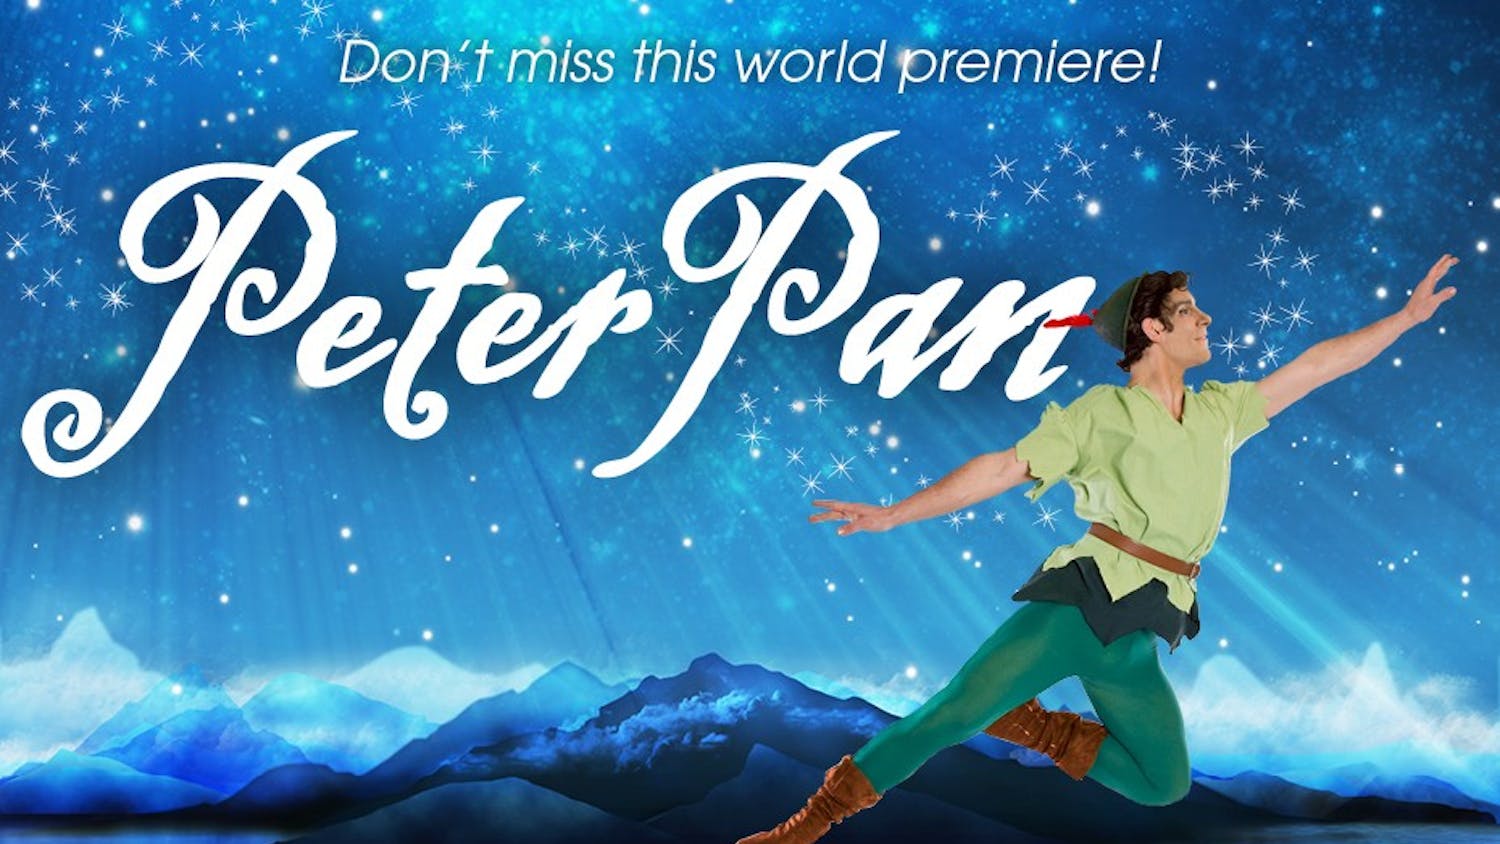 Columbia City Ballet Artistic Director William Starrett brings the story of Peter Pan to the stage through original choreography and whimsical characters.